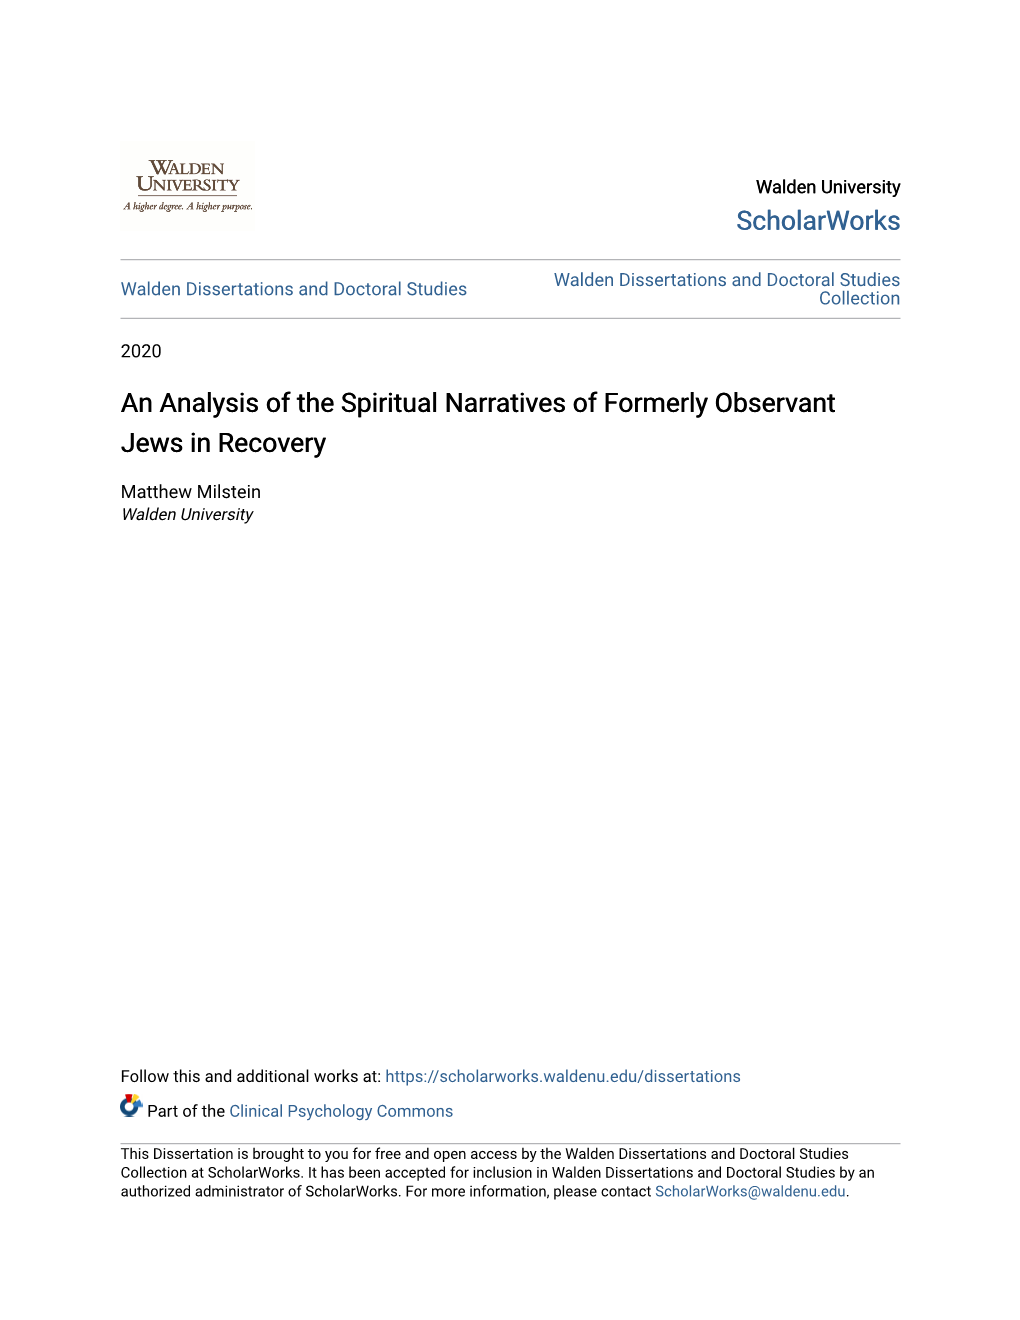 An Analysis of the Spiritual Narratives of Formerly Observant Jews in Recovery